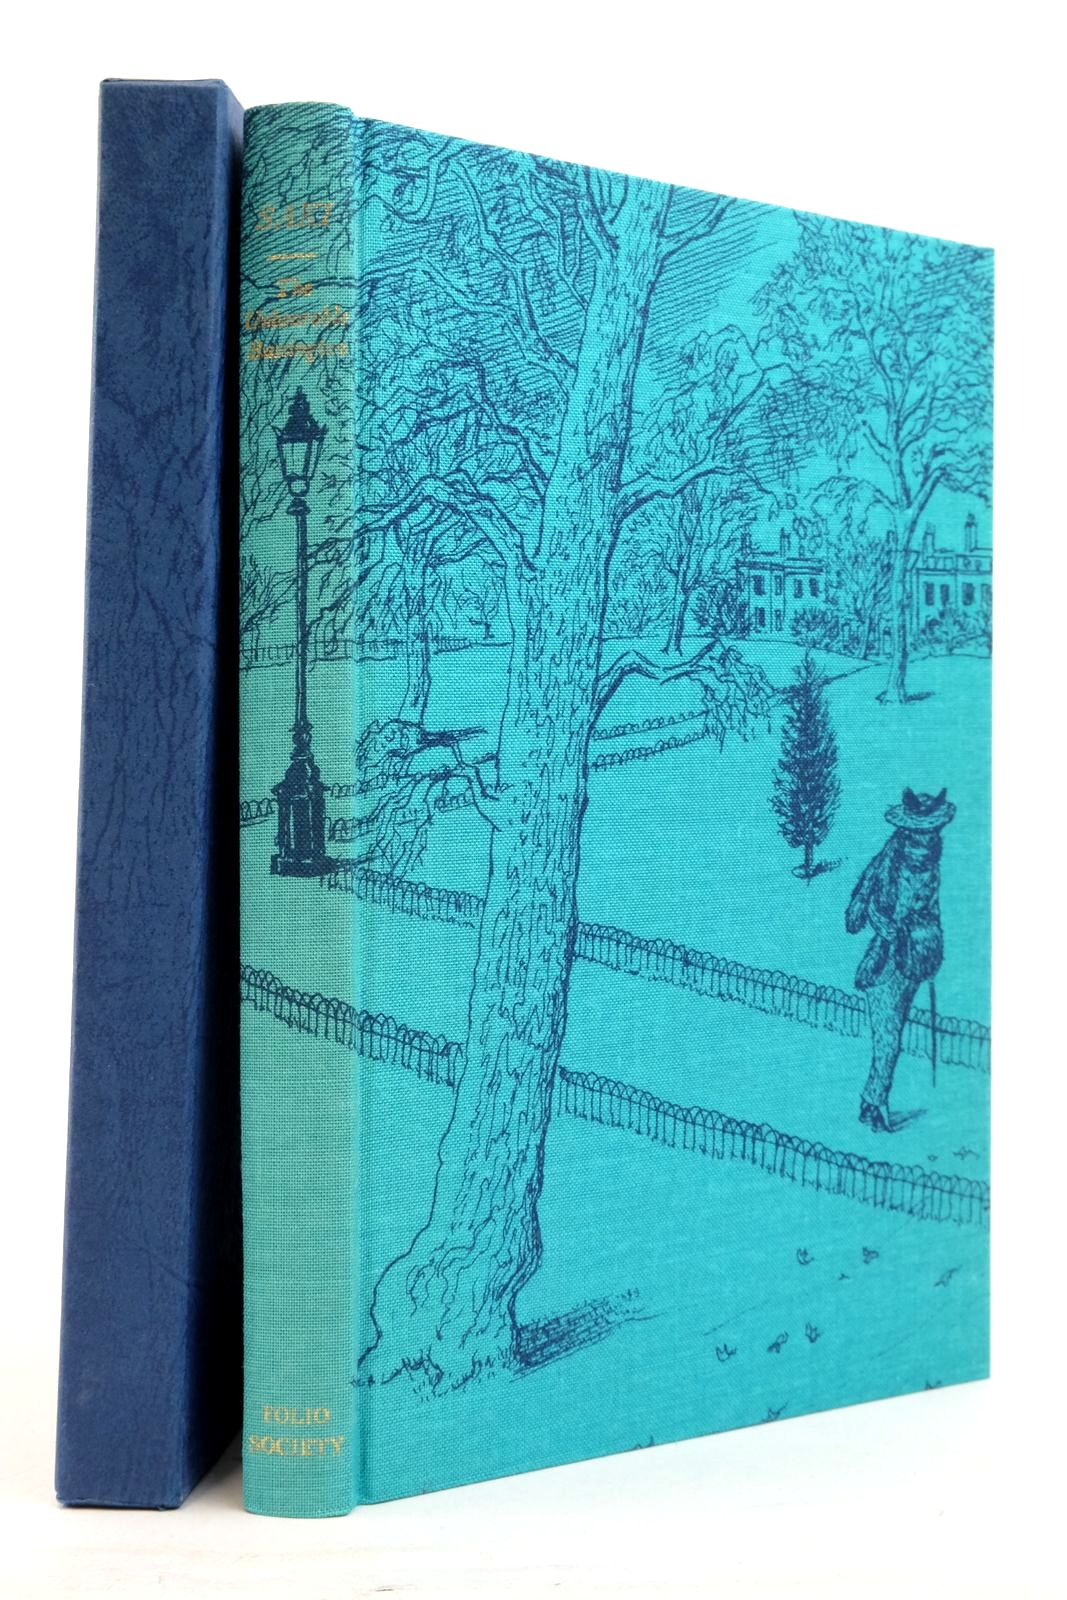 Photo of THE UNBEARABLE BASSINGTON written by Saki,  Aiken, Joan illustrated by Lancaster, Osbert published by Folio Society (STOCK CODE: 2138163)  for sale by Stella & Rose's Books